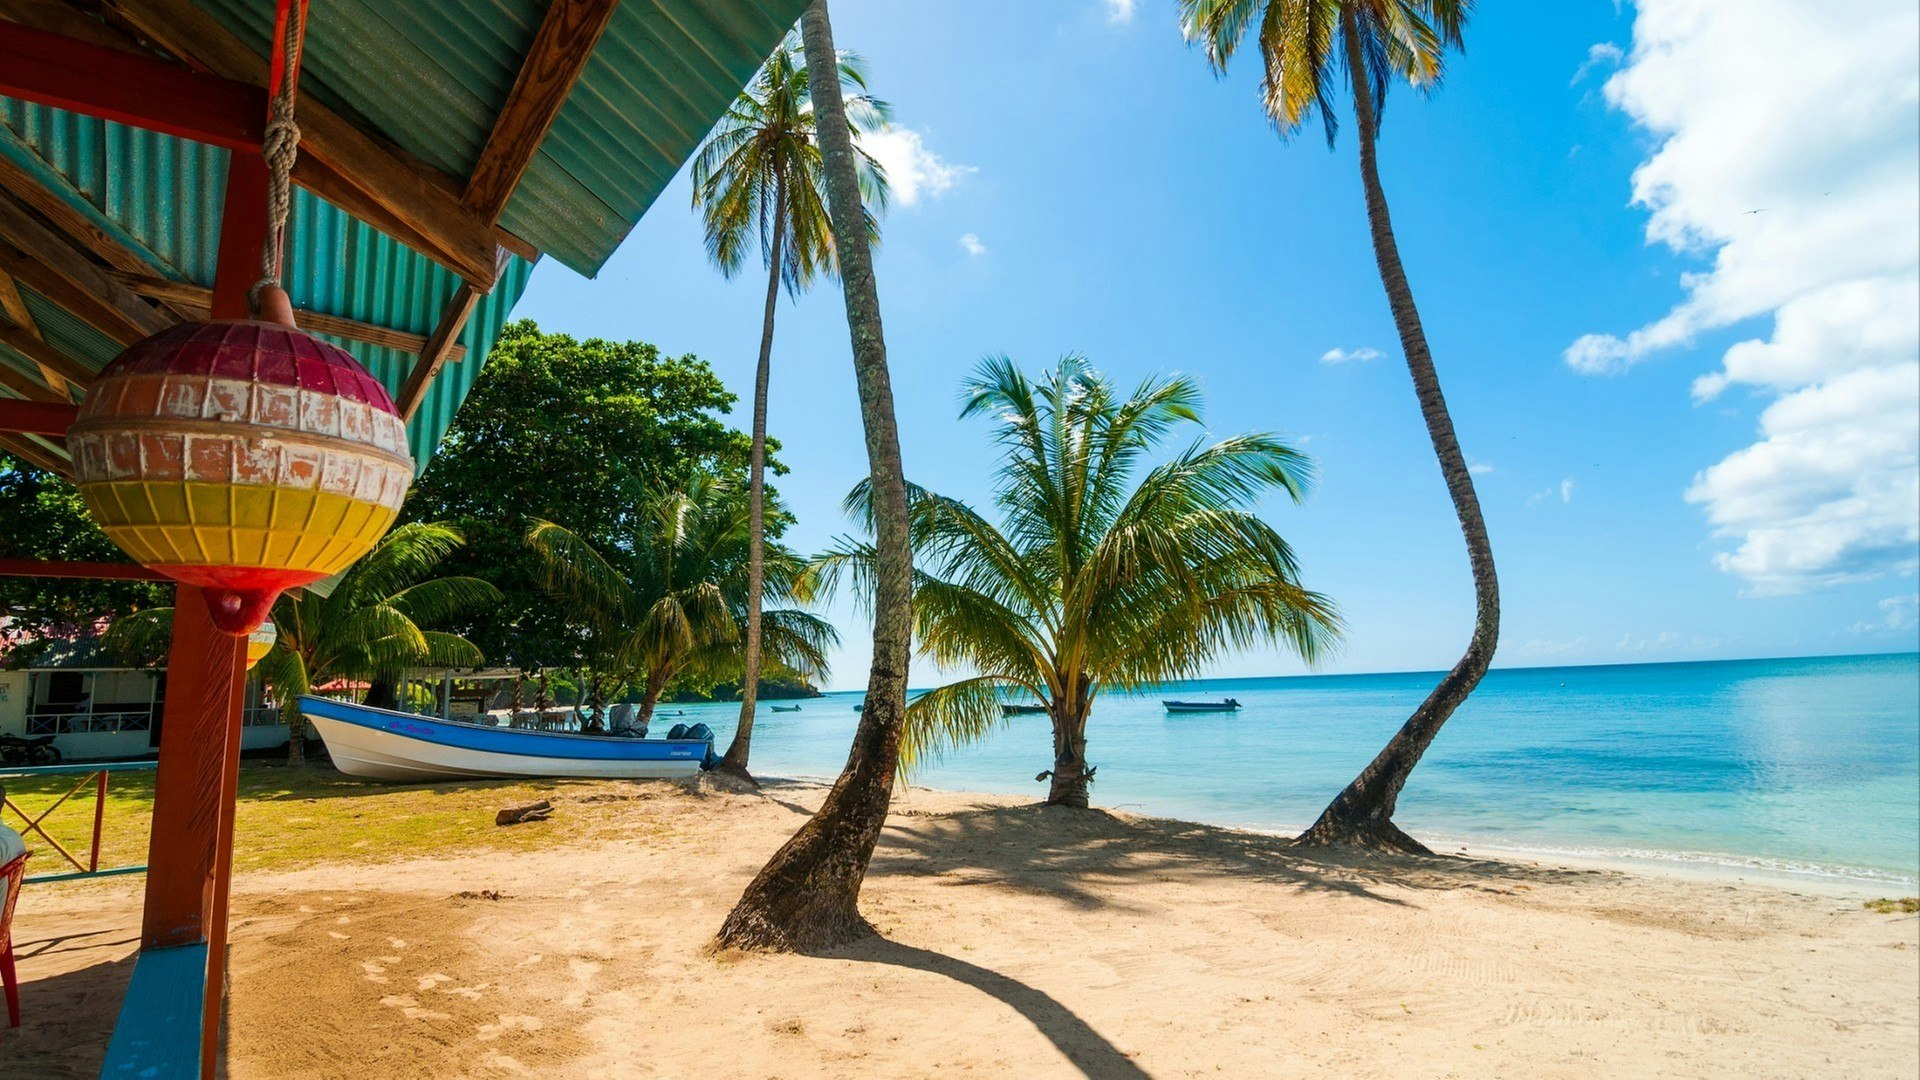 Beach, palm trees, and turquoise water in San Andres y Providencia, Colombia